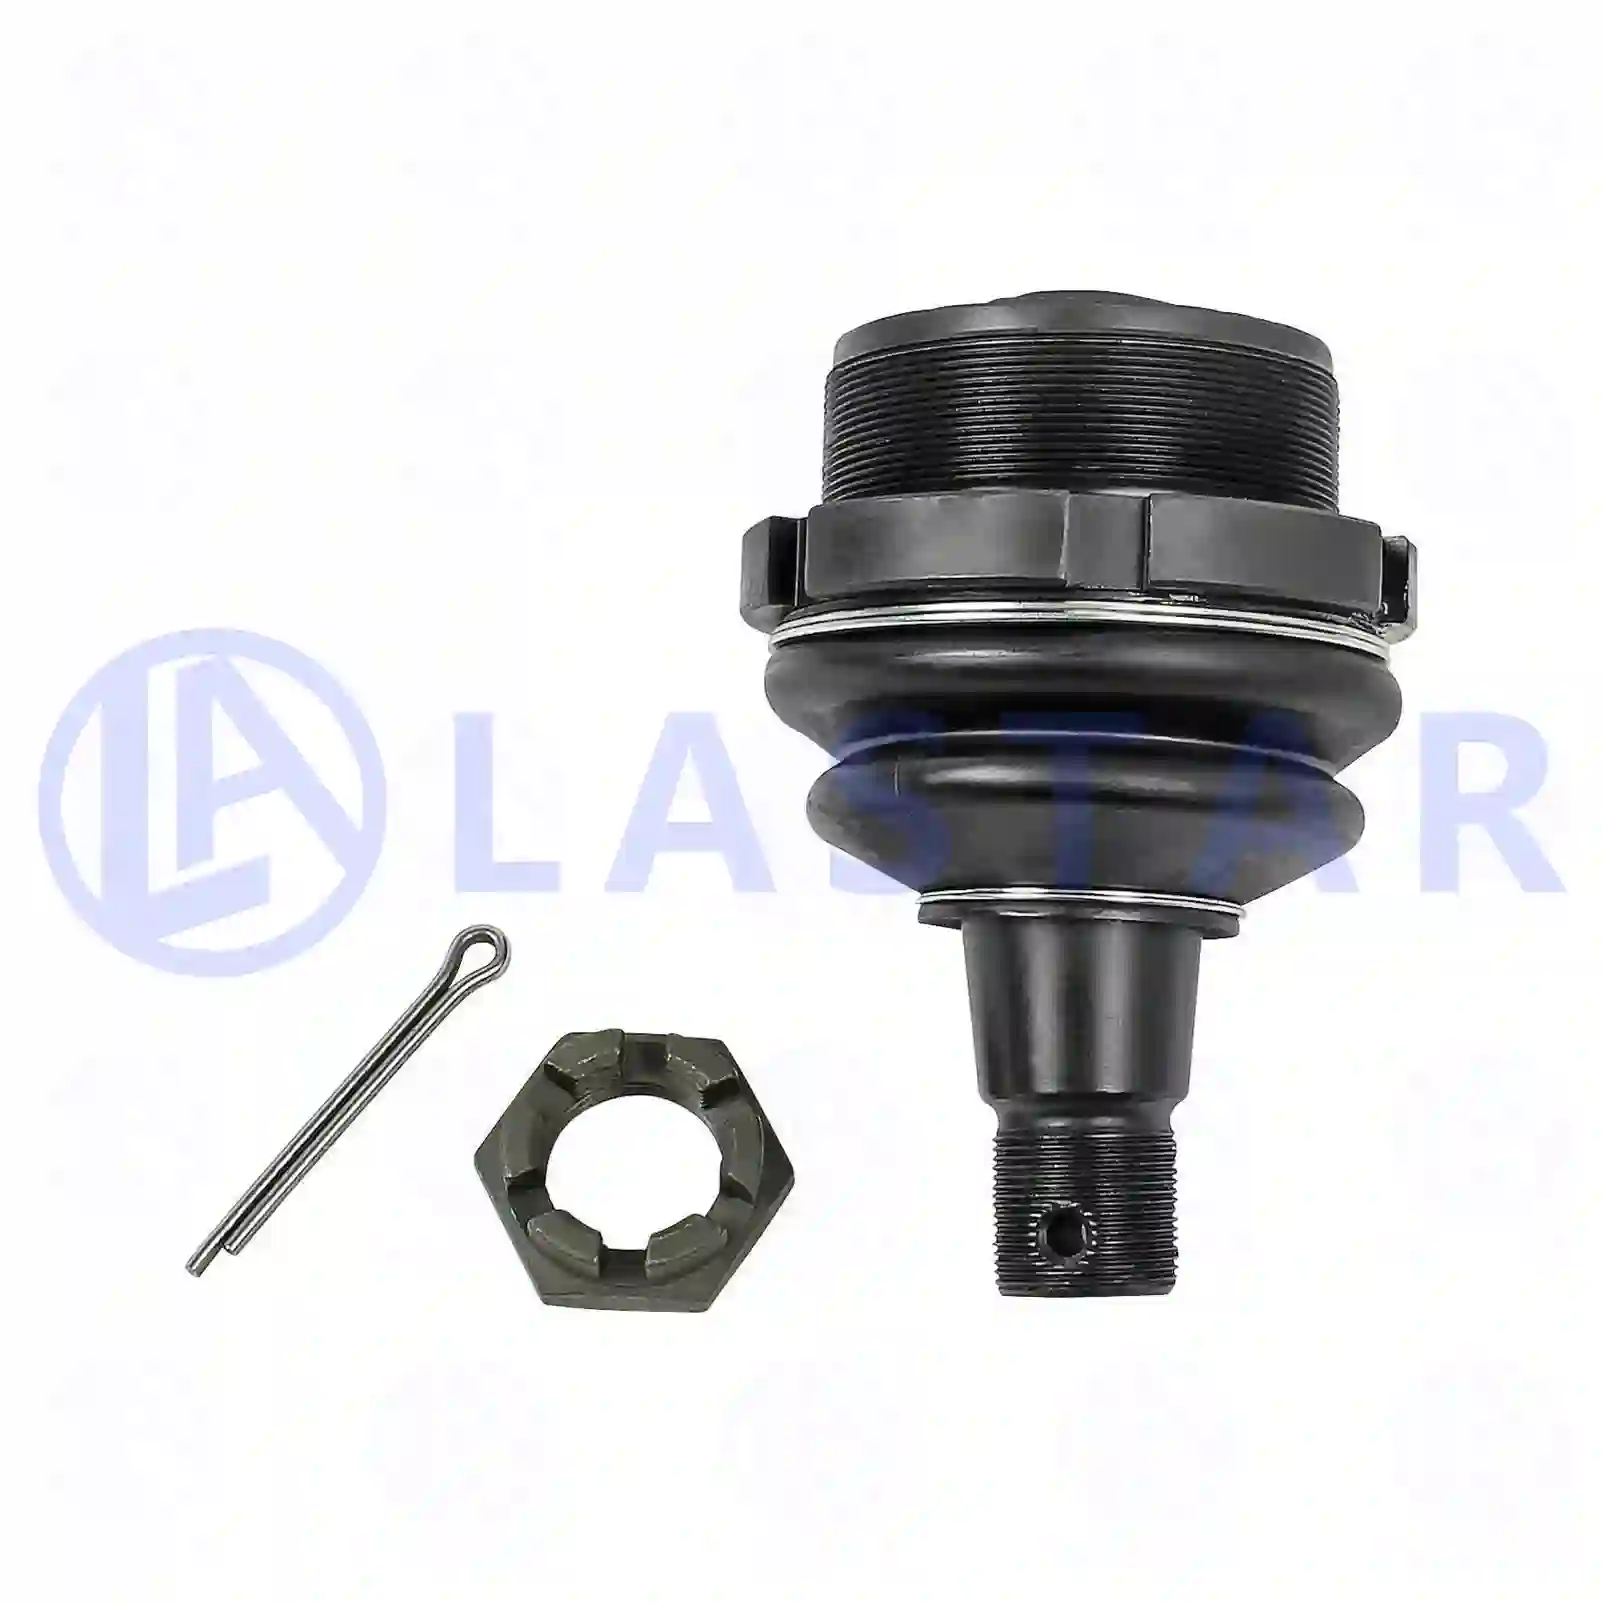 Ball joint, 77731247, 20739867, 20994563, 70314325, 70321617, ZG40339-0008 ||  77731247 Lastar Spare Part | Truck Spare Parts, Auotomotive Spare Parts Ball joint, 77731247, 20739867, 20994563, 70314325, 70321617, ZG40339-0008 ||  77731247 Lastar Spare Part | Truck Spare Parts, Auotomotive Spare Parts